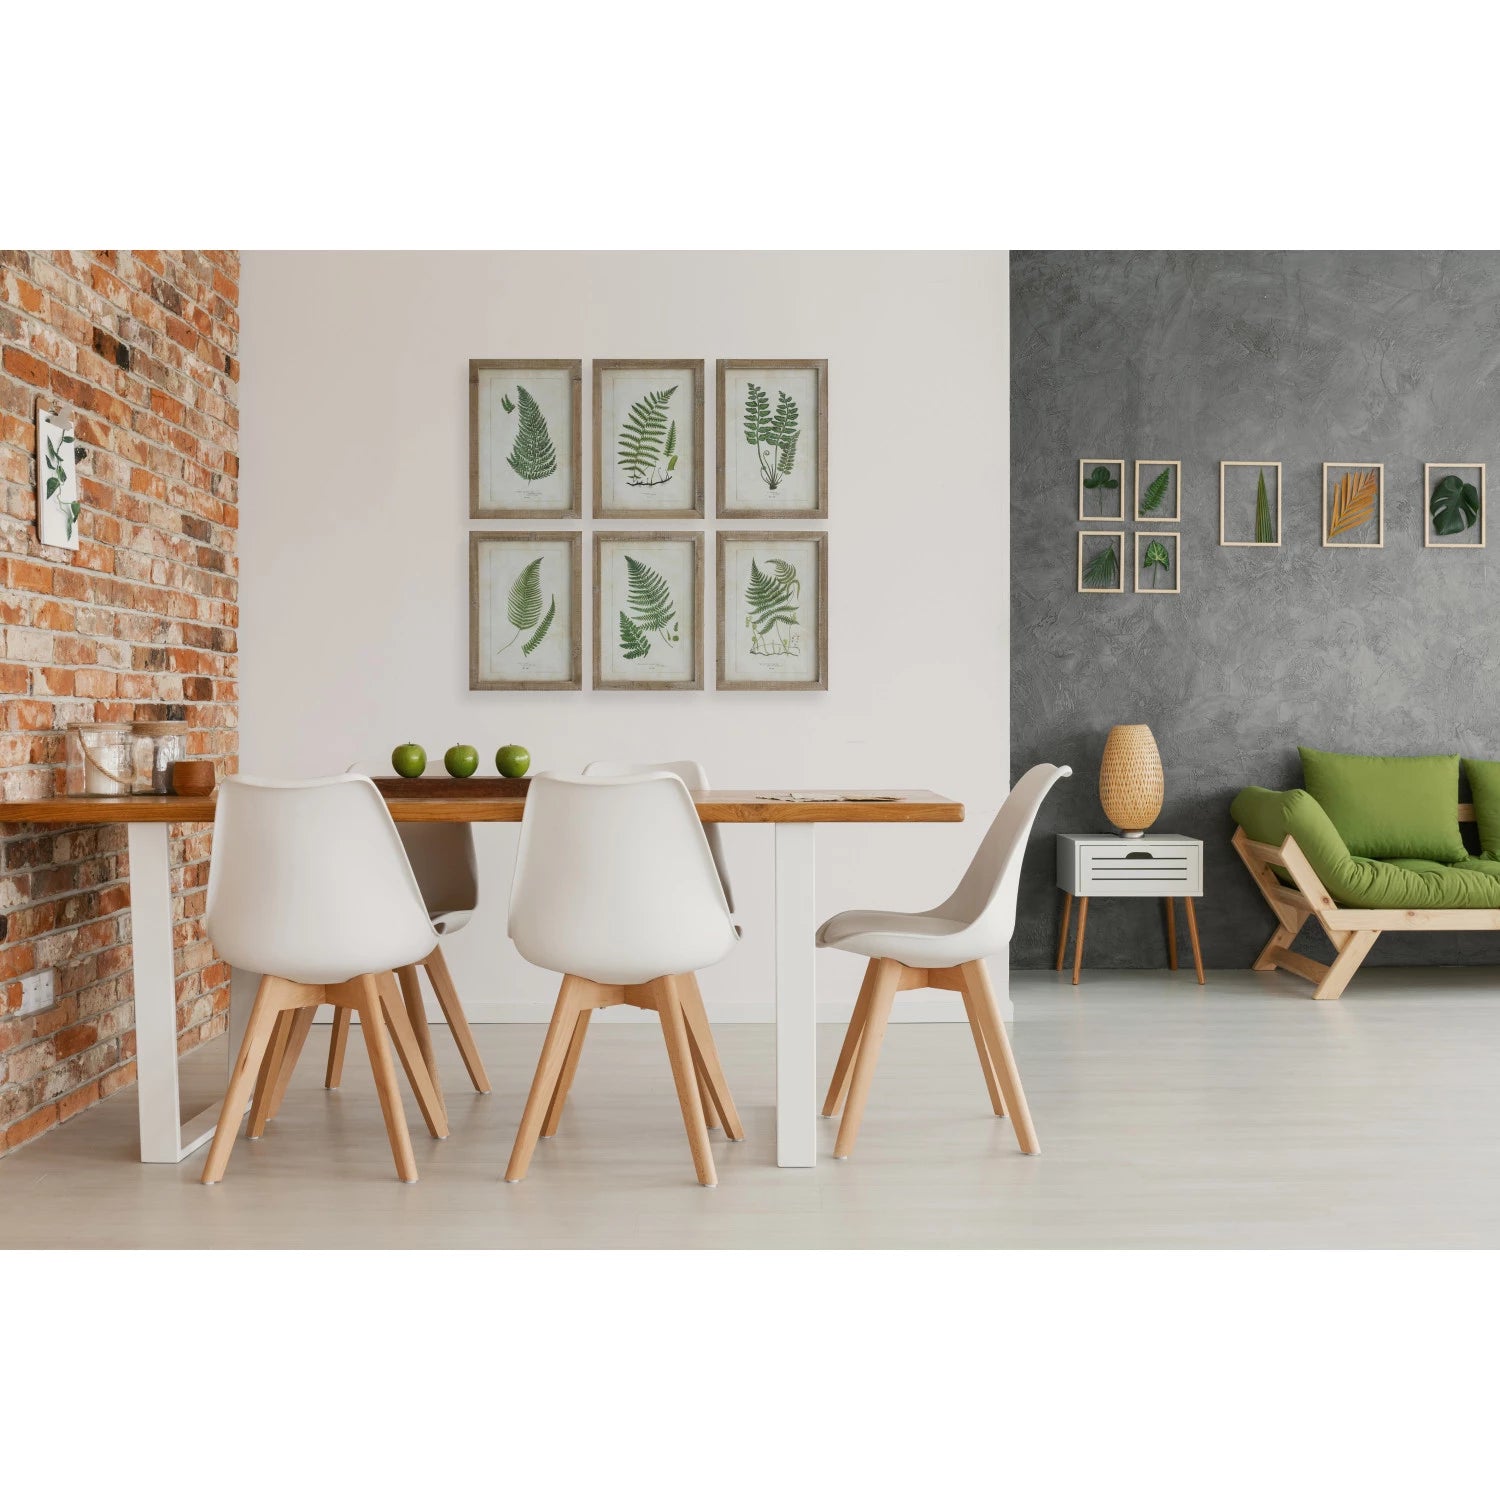 Dining room eating area pictured with six wood framed fern wall art photos in background. Modern Farmhouse decor. French Country home decor. 